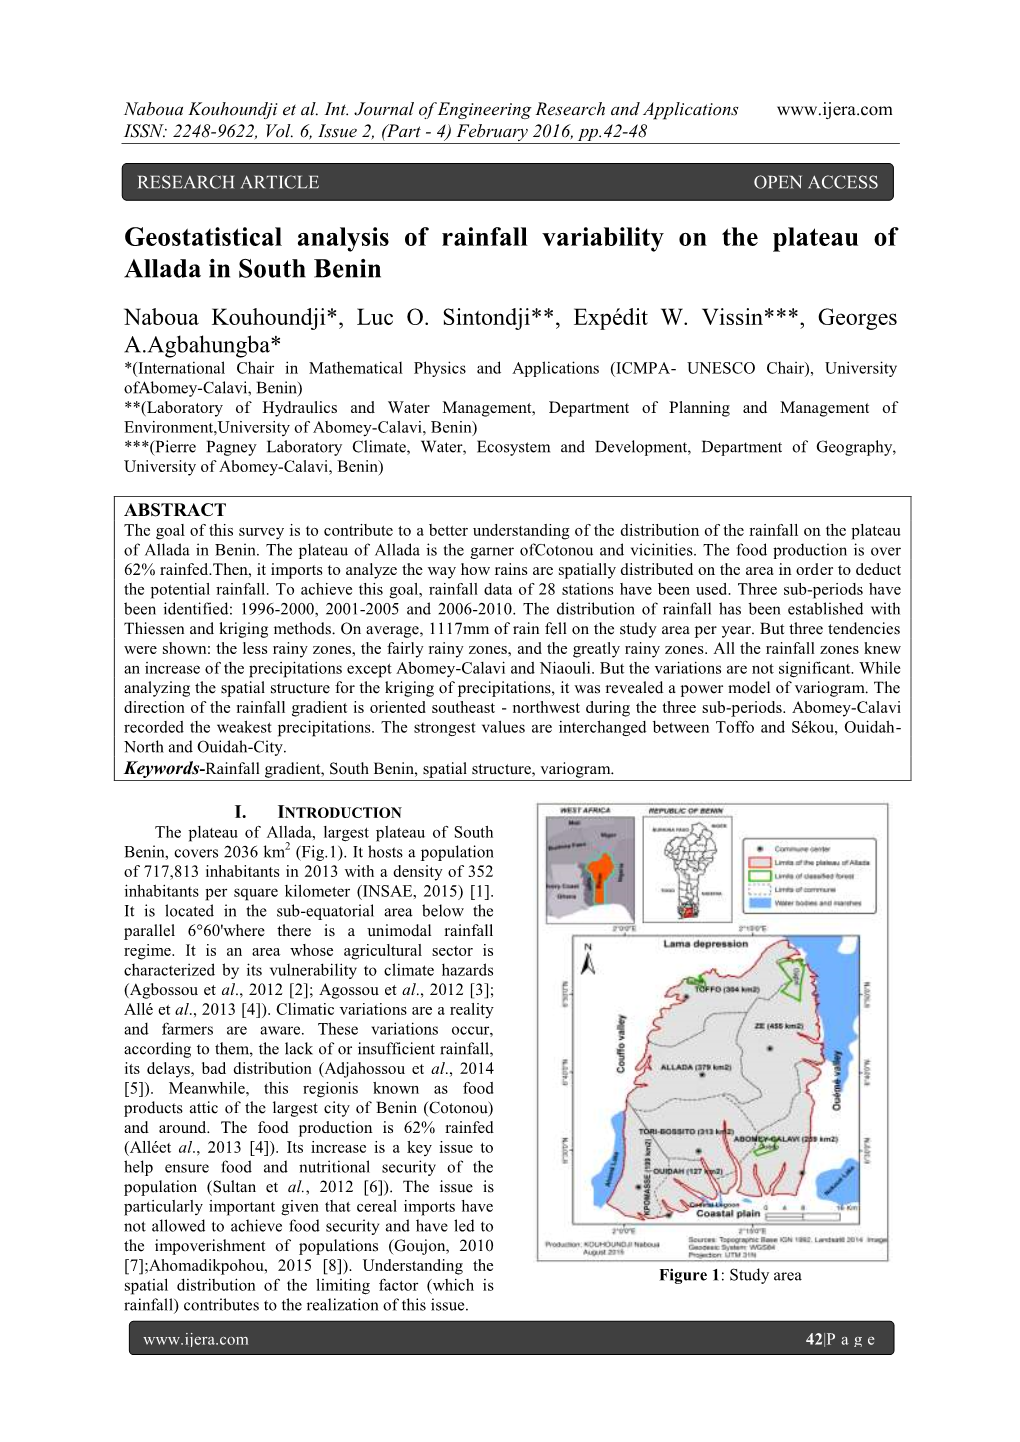 Geostatistical Analysis of Rainfall Variability on the Plateau of Allada in South Benin